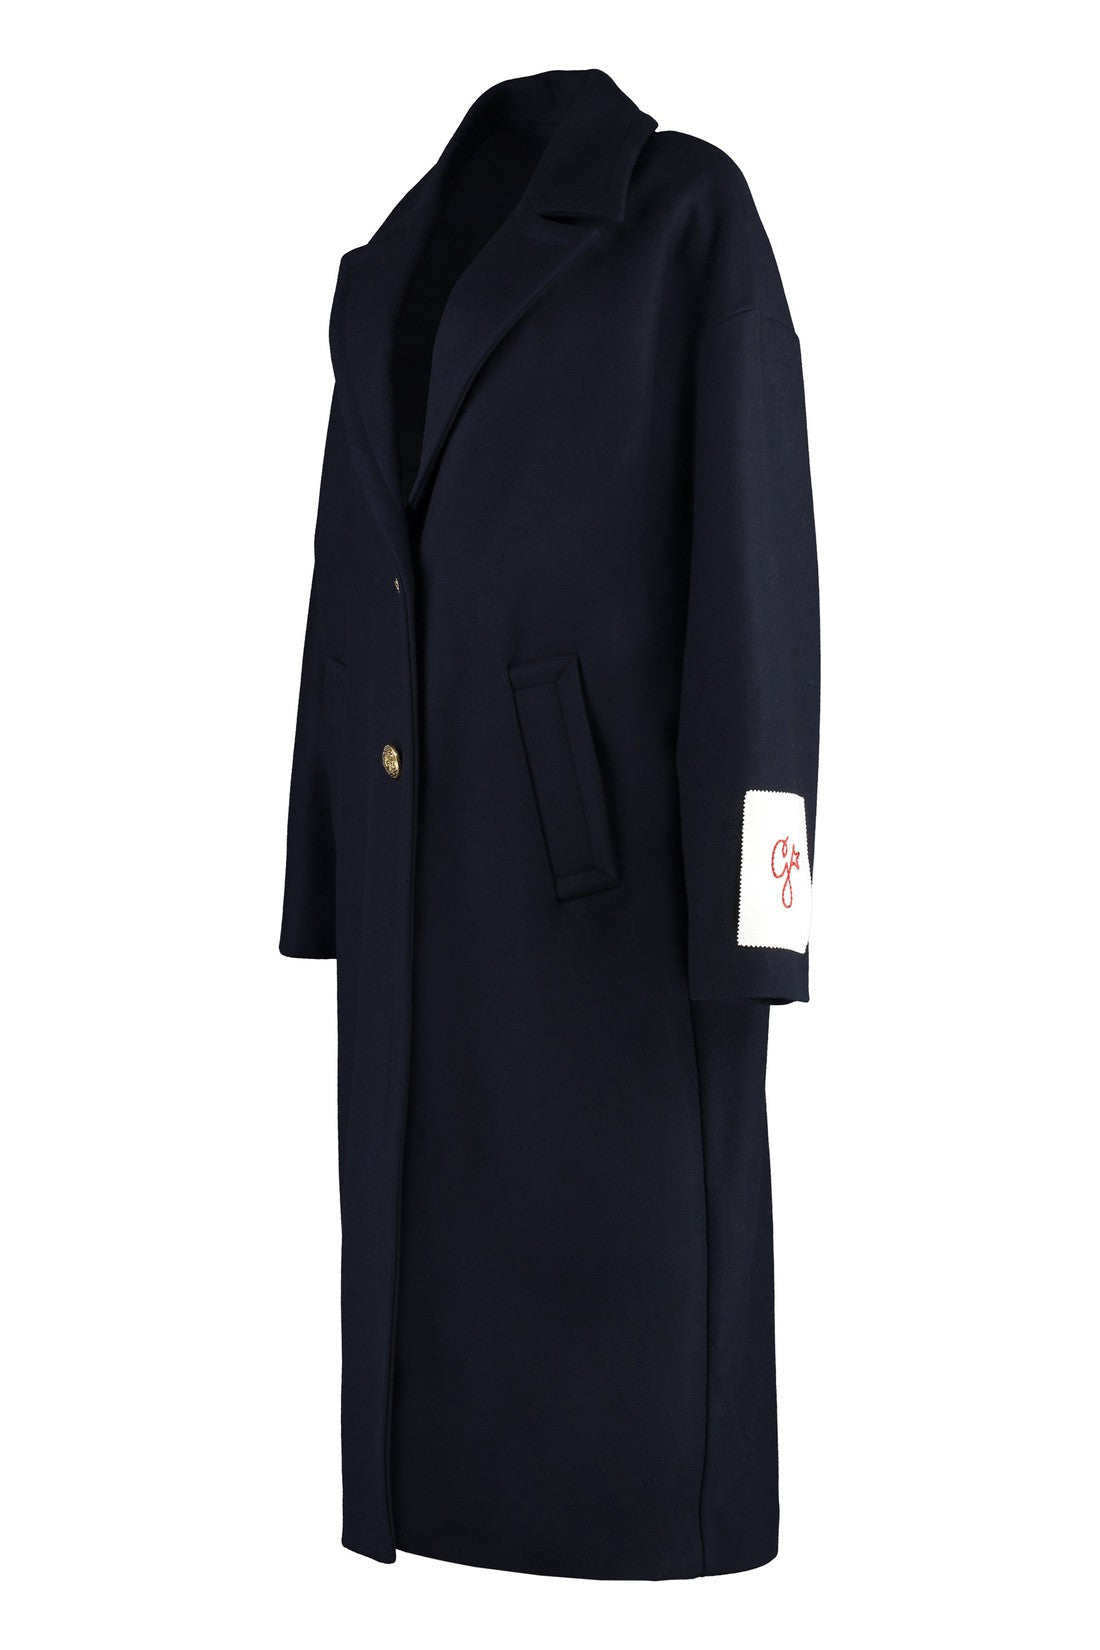 Golden Goose-OUTLET-SALE-Bertina single-breasted wool coat-ARCHIVIST